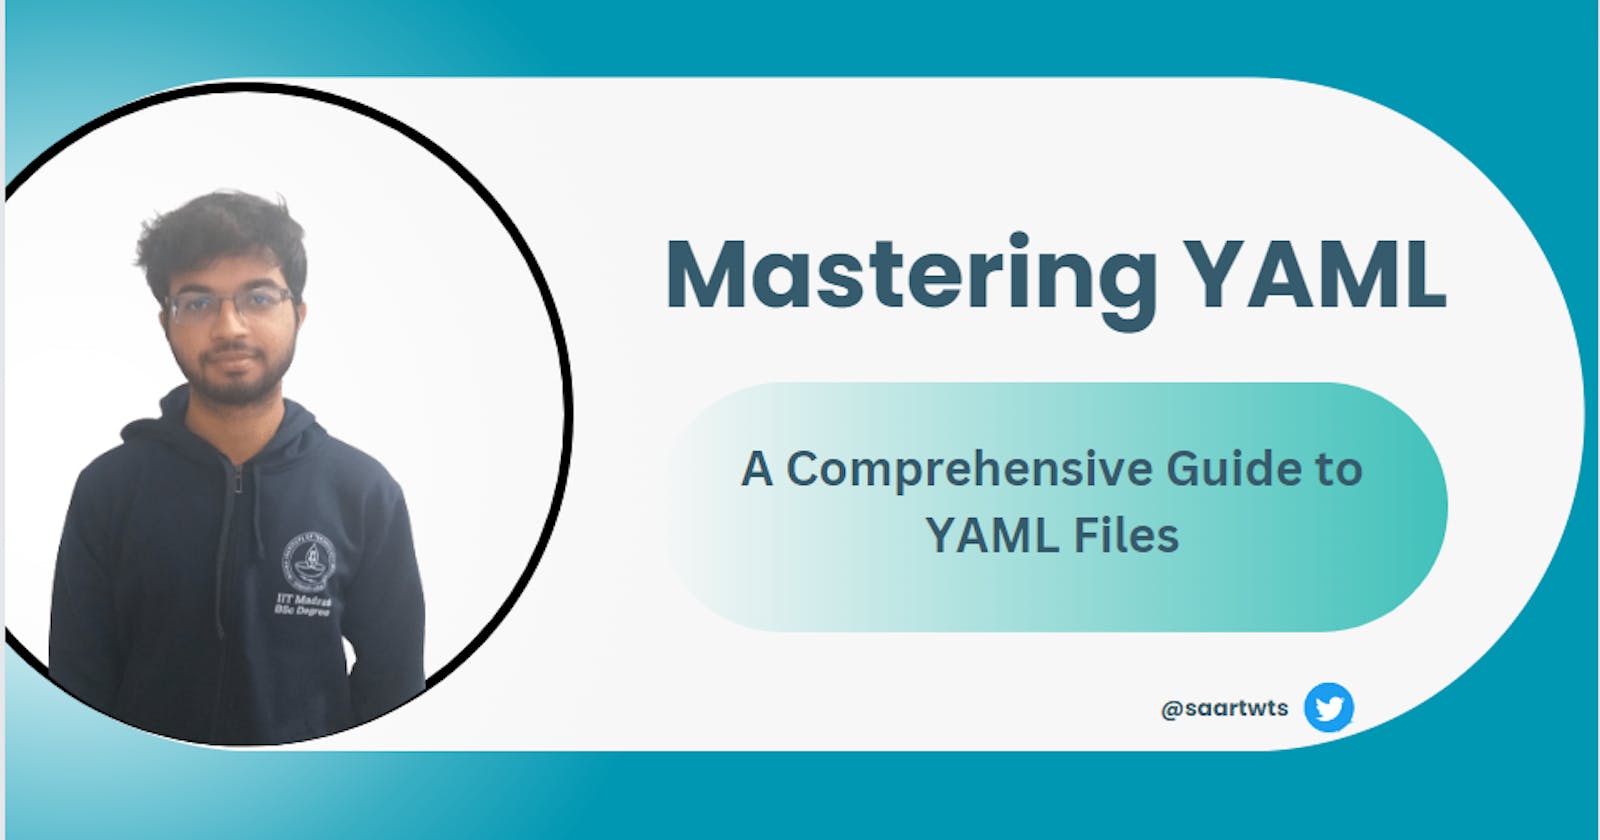 Mastering YAML: A Comprehensive Guide to YAML Files